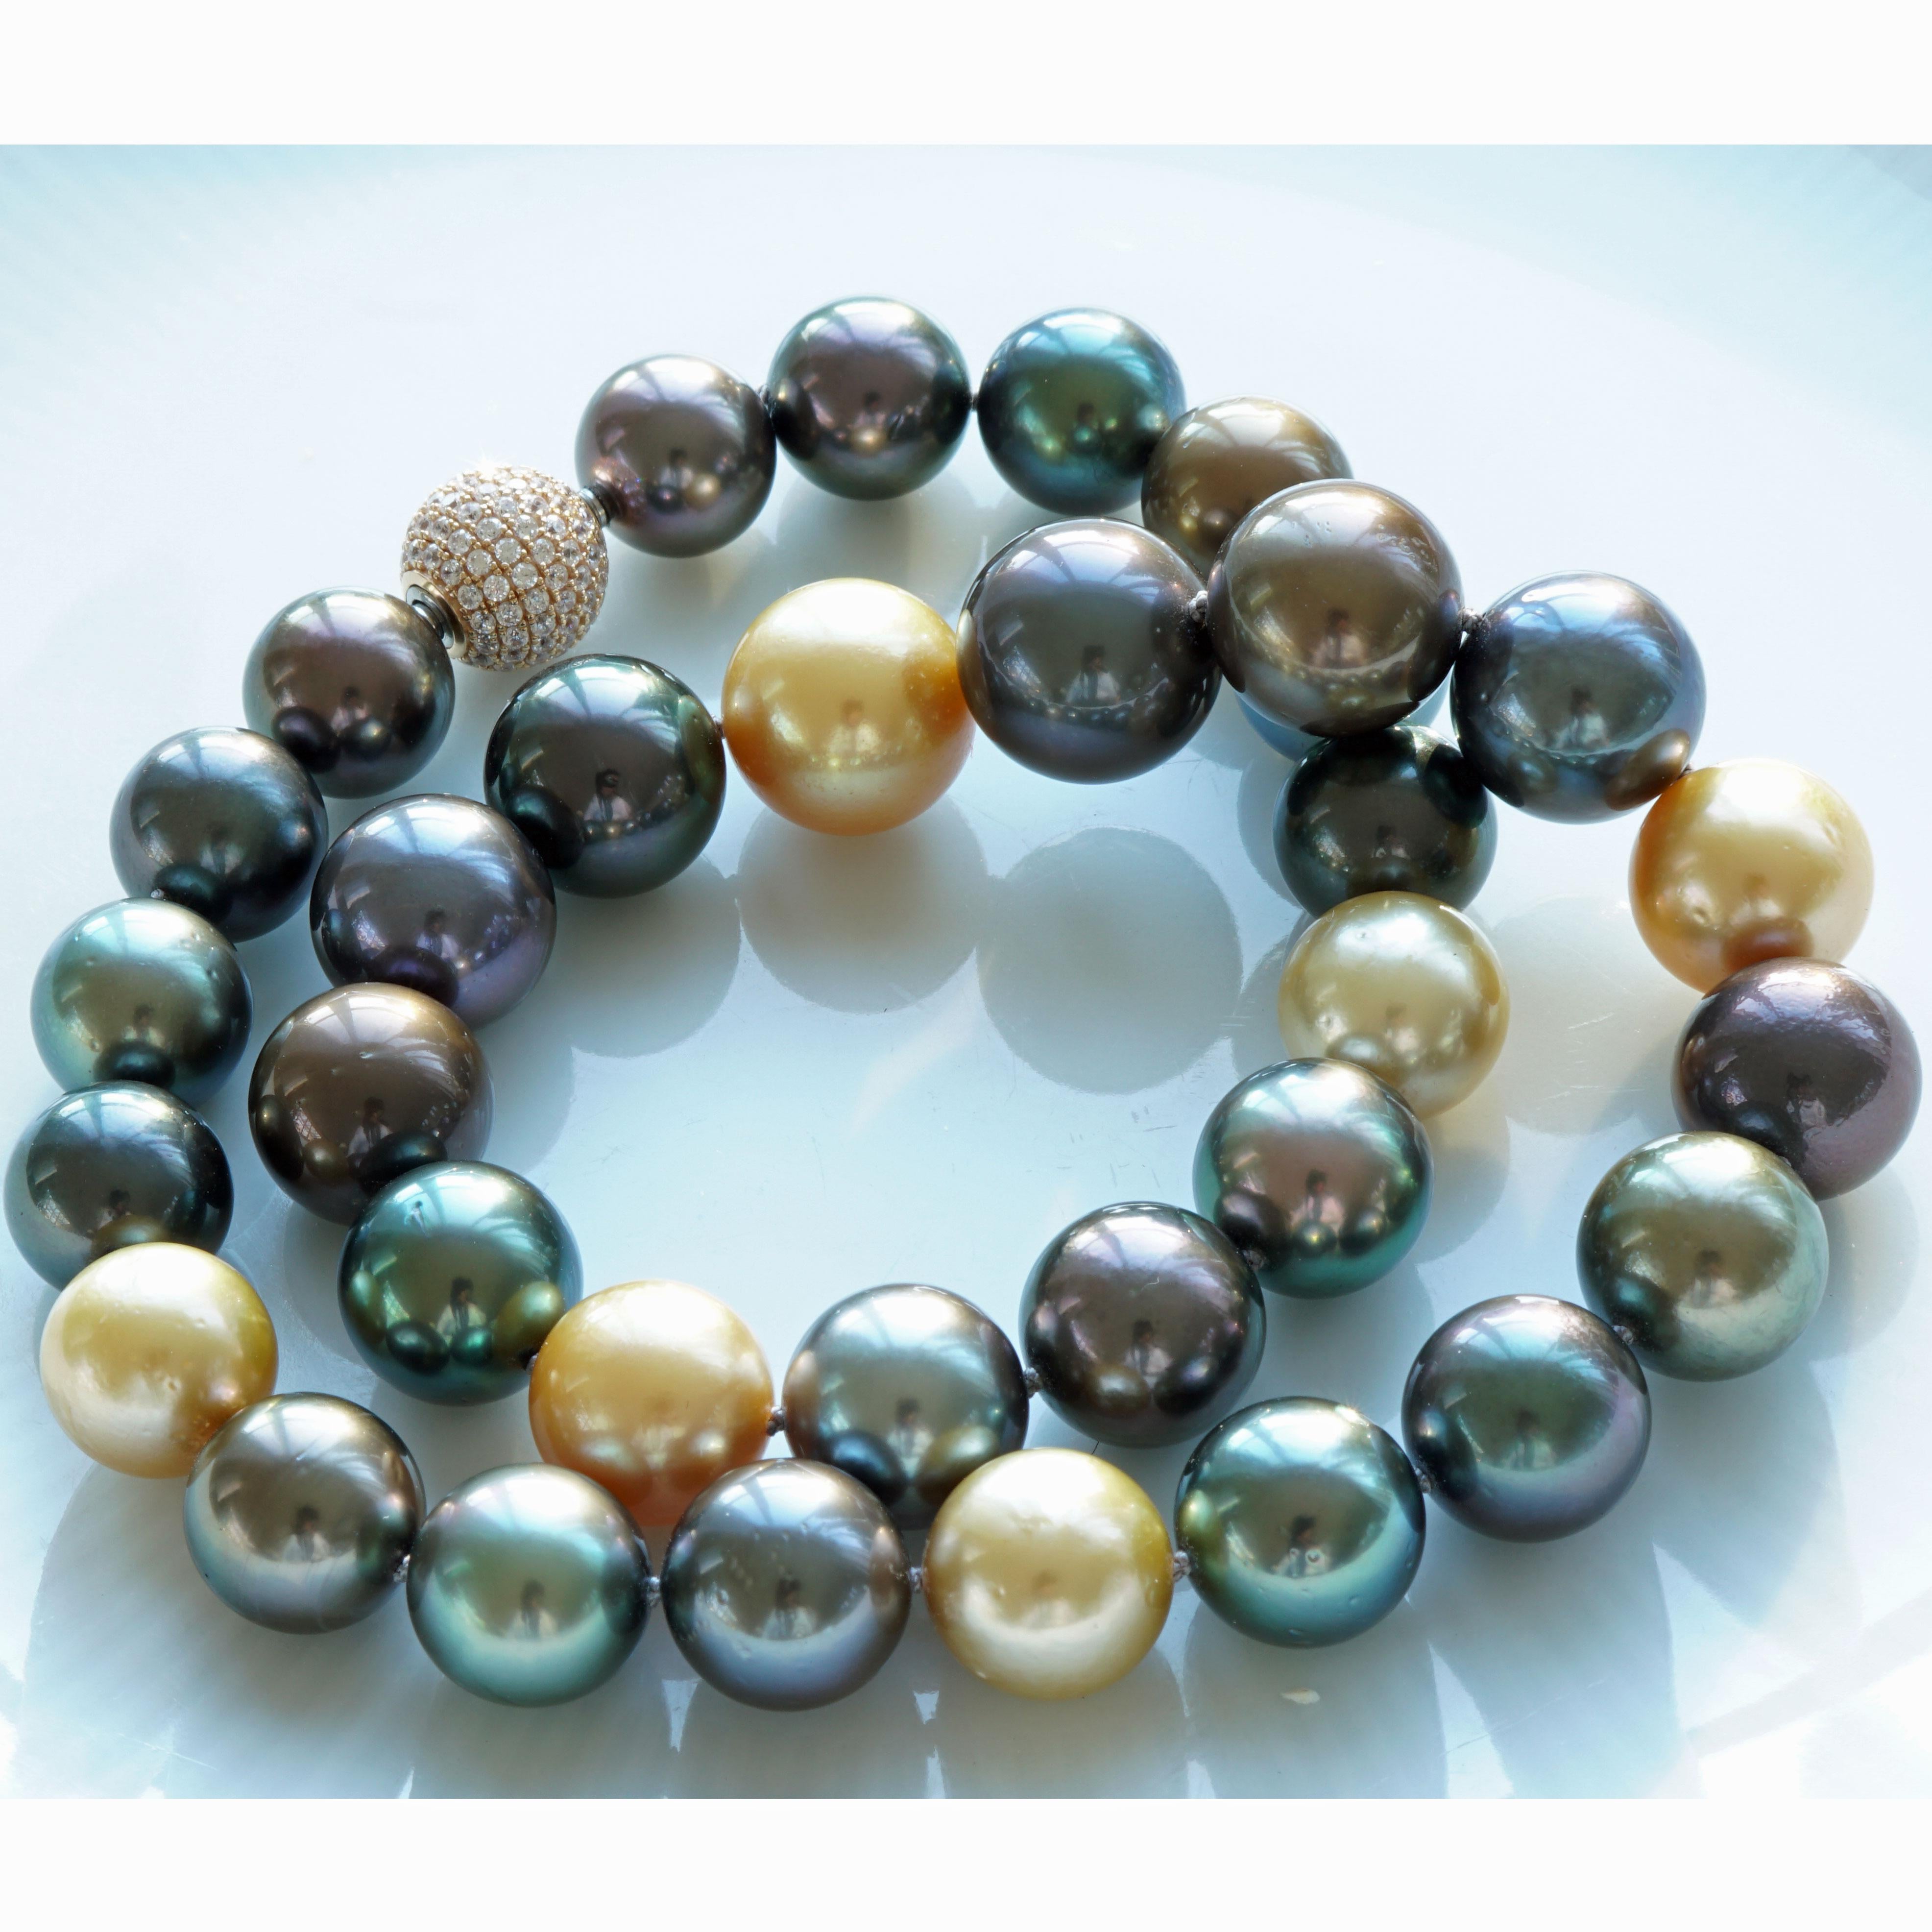 AAA+ Tahiti Southsea Necklace Wow What Colors Gold Mocha Pistachio Grey 12-15 mm For Sale 2